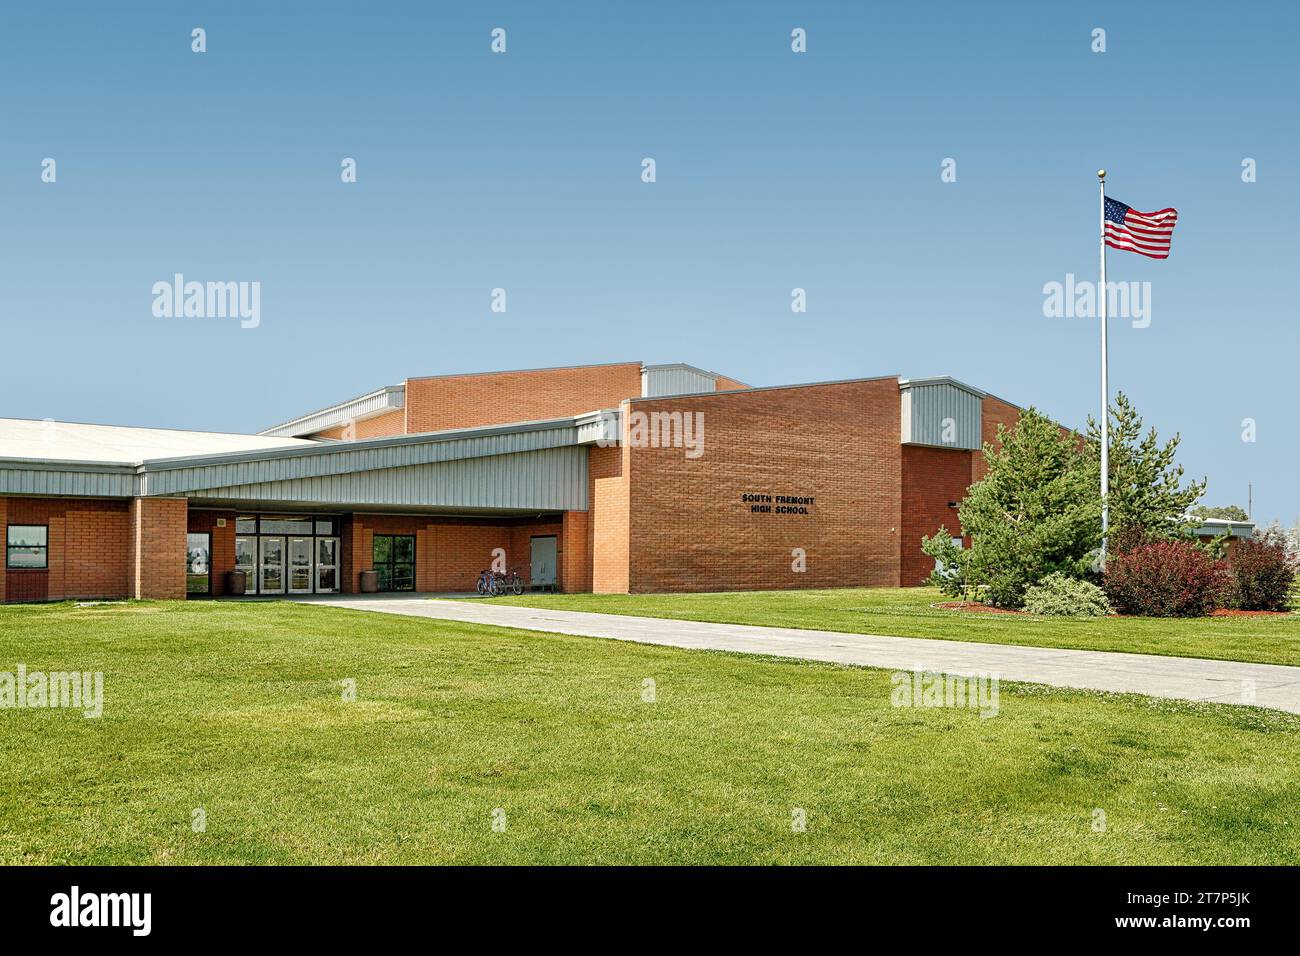 Exterior image of South Freemont High School, showing the brick construction, and energy efficient windows. Stock Photo